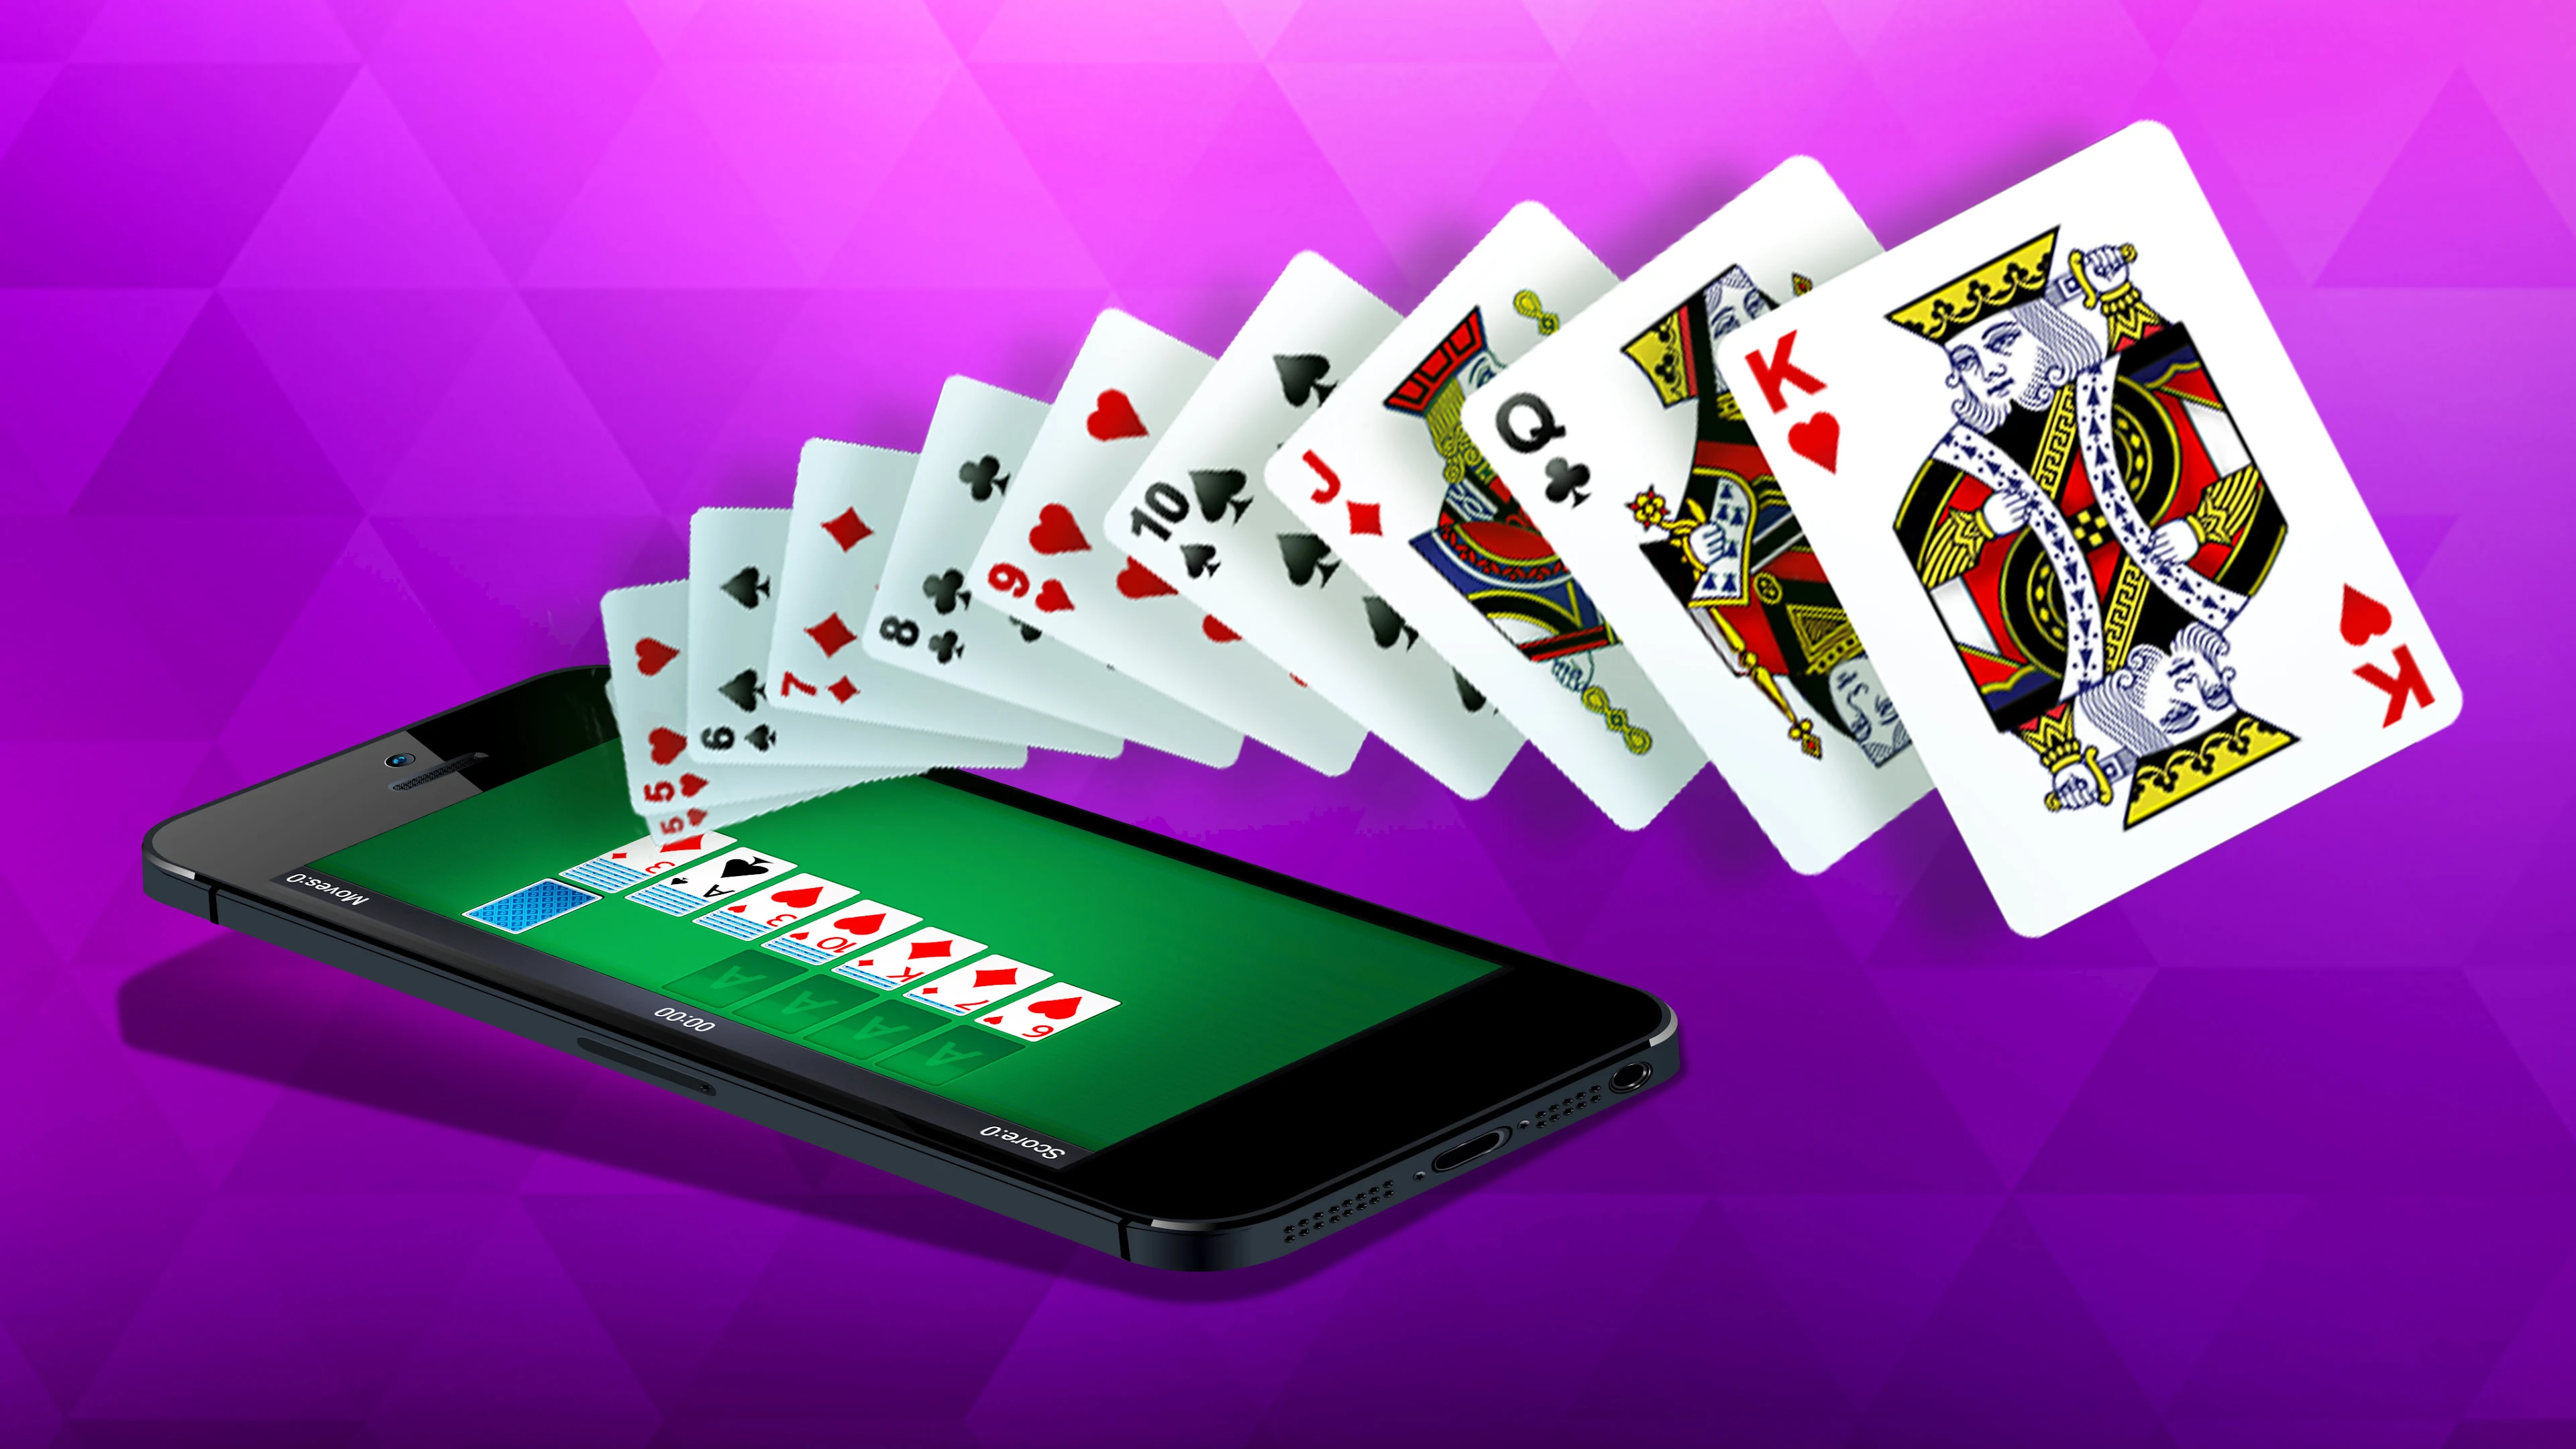 Classic Spider Solitaire Game - Apps on Google Play